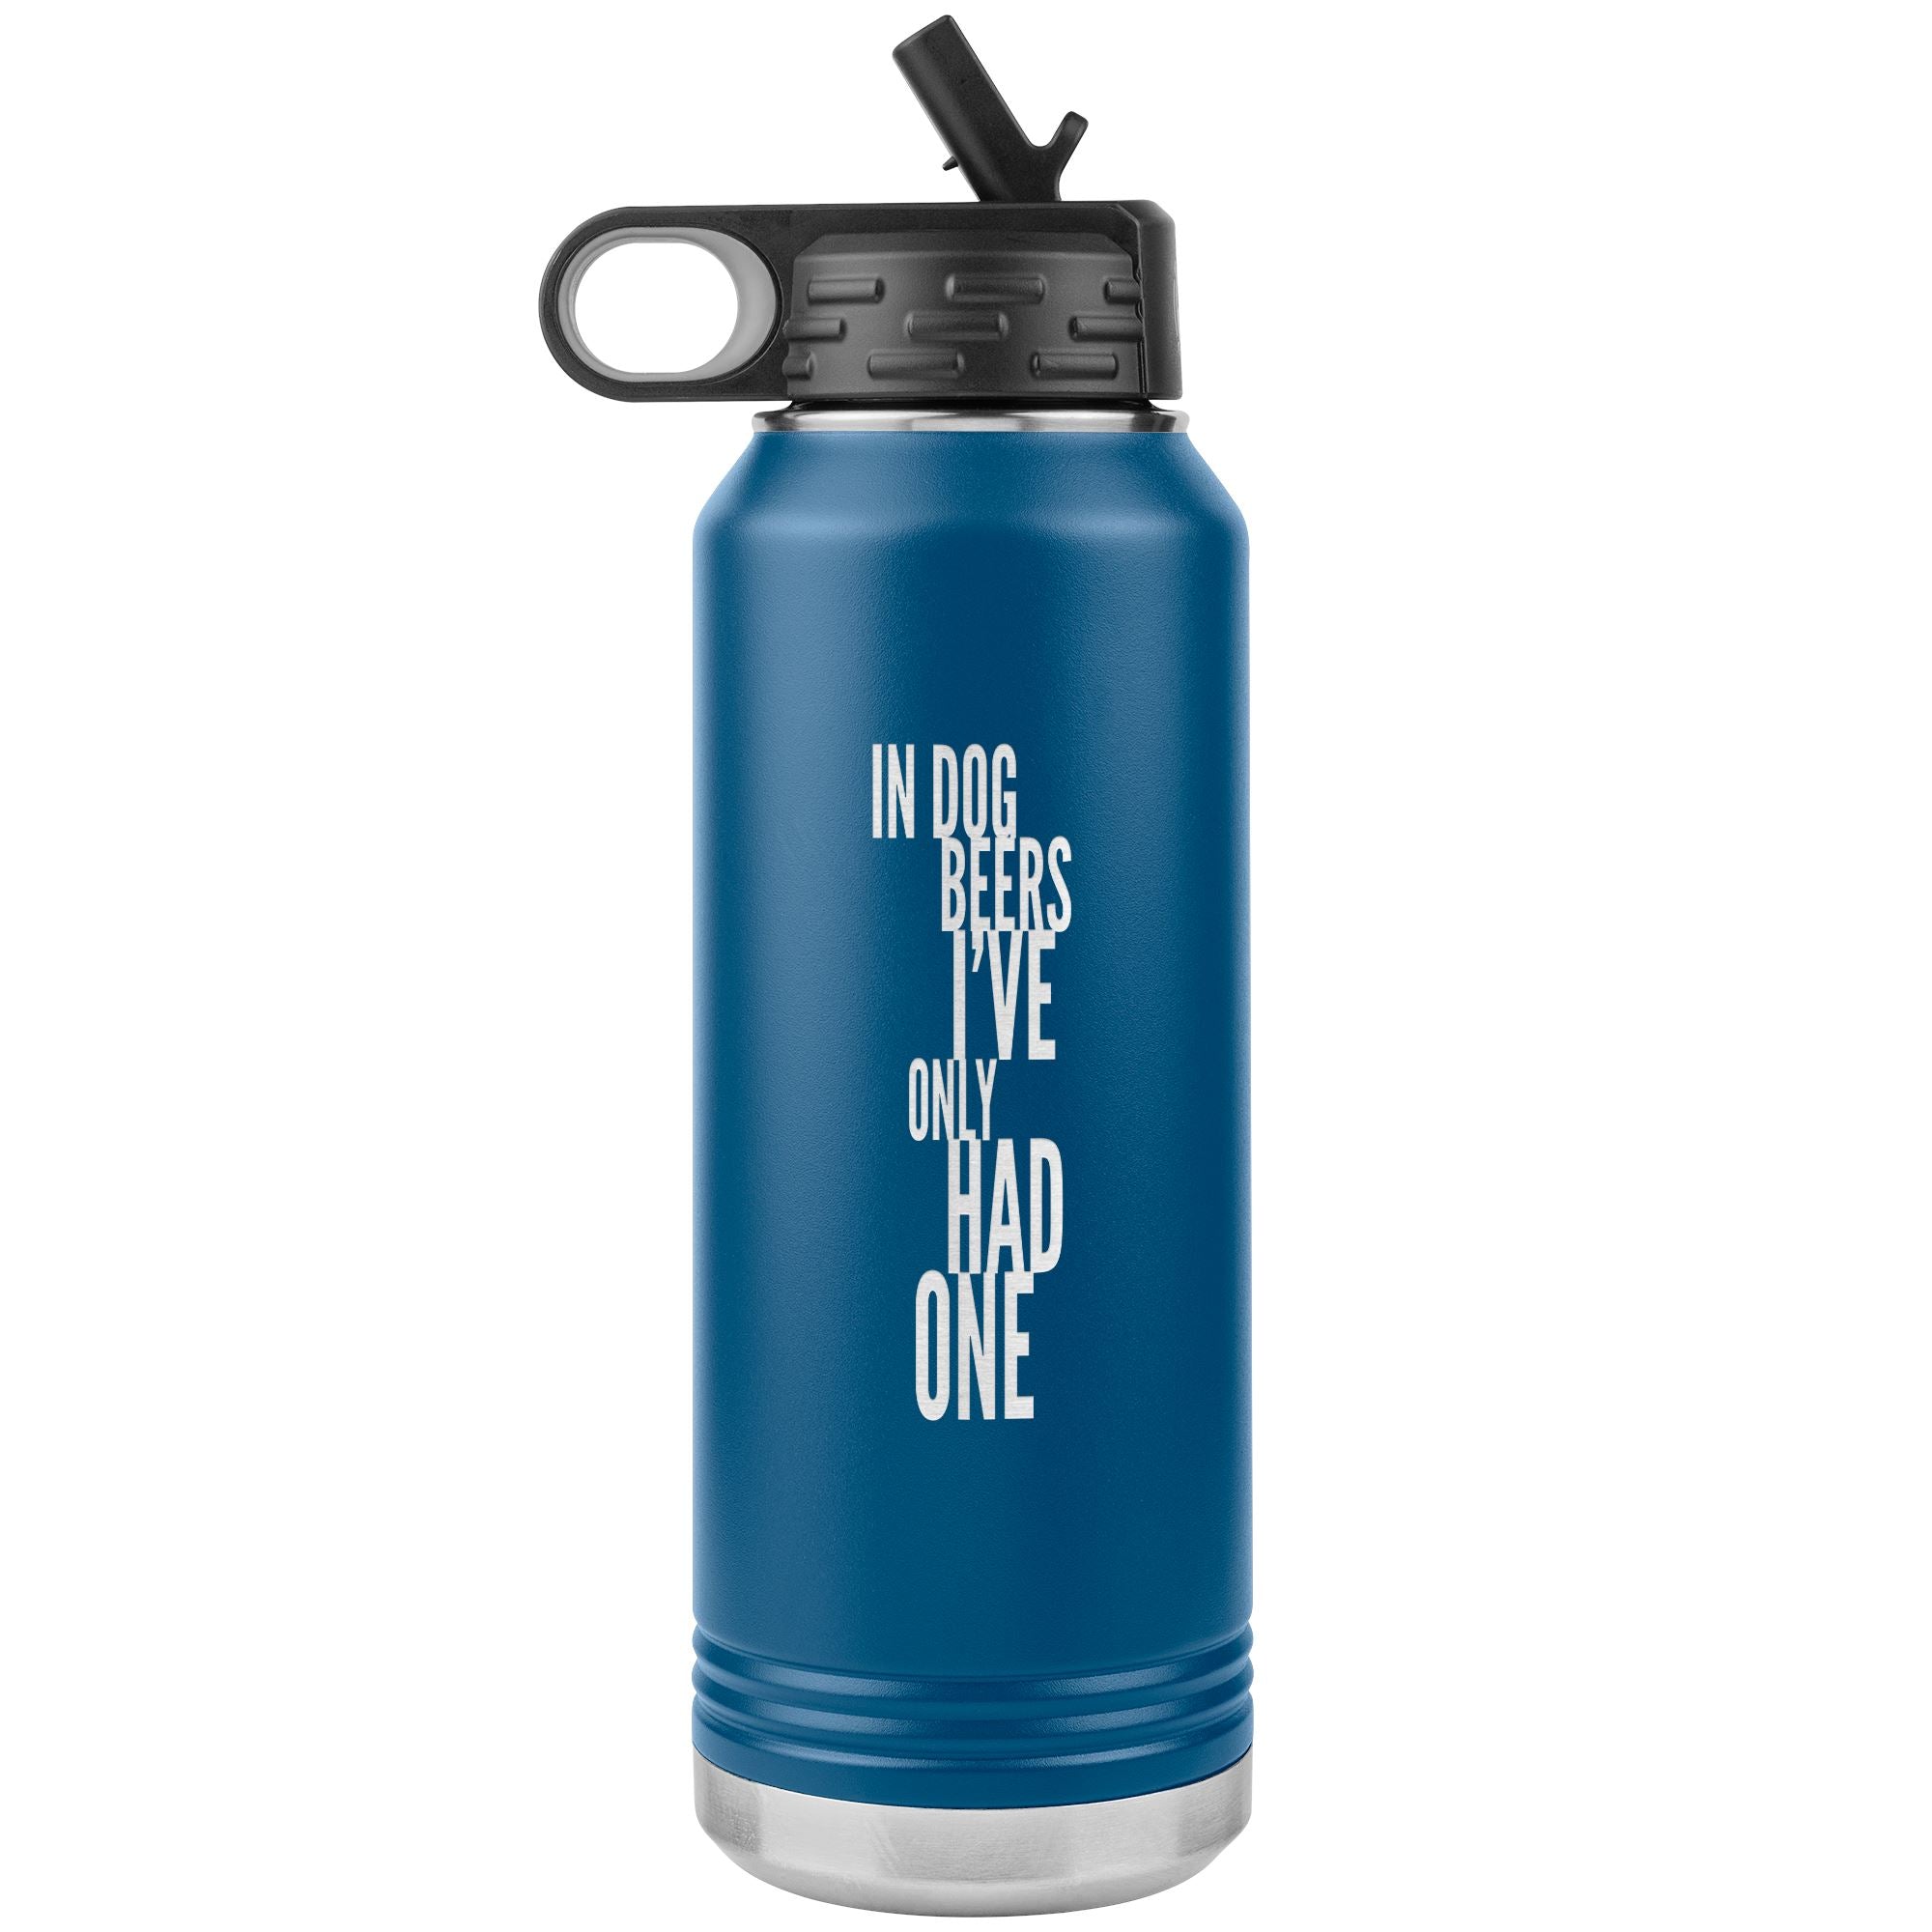 In Dog Beers I've Only Had One 32oz Tumbler Tumblers Blue 